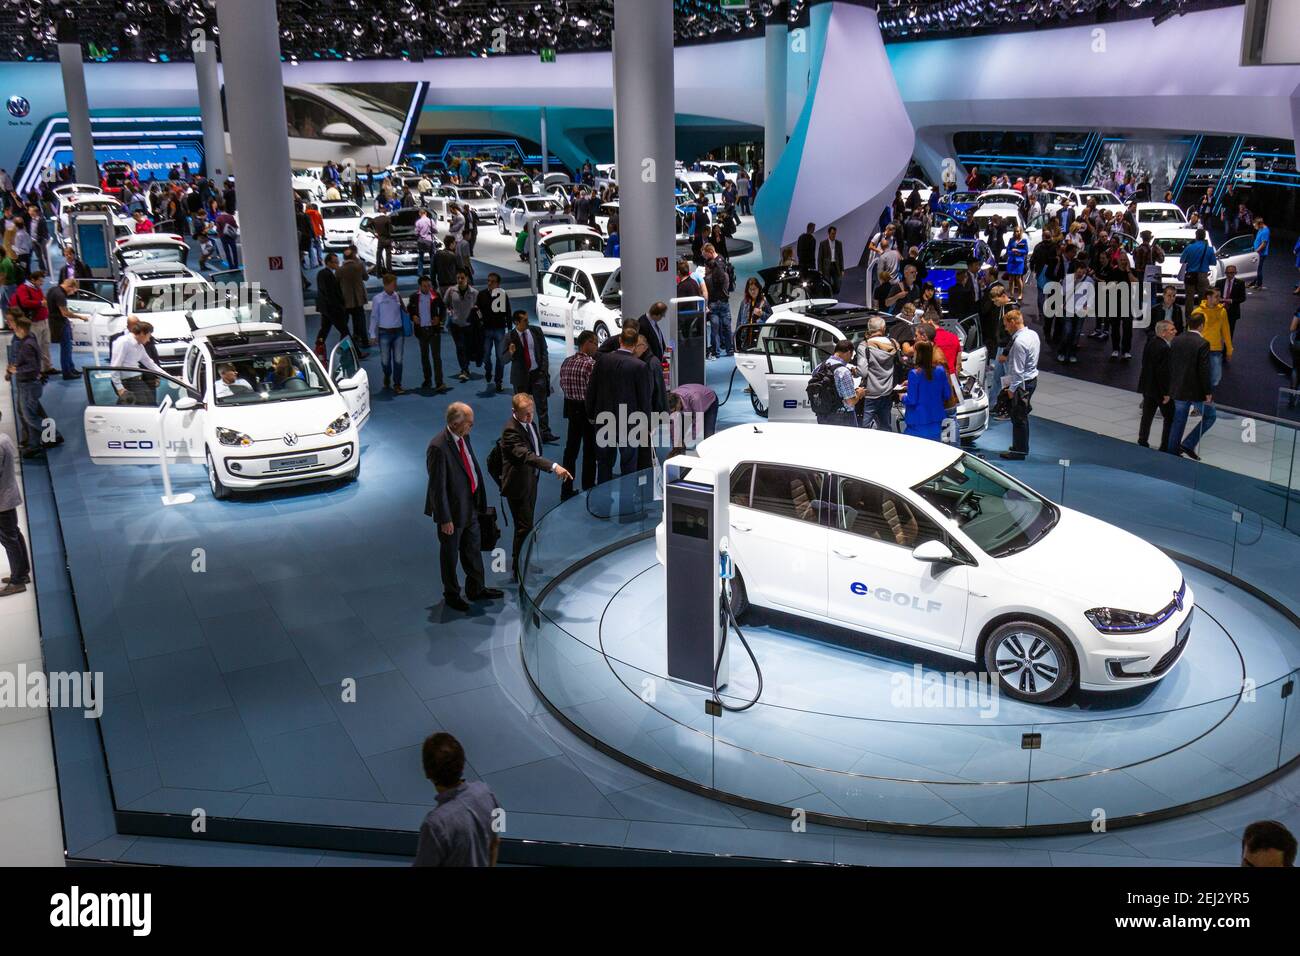 FRANKFURT, GERMANY - SEP 13, 2013: Trade show visitors at the Volkswagen stand with the new cars showcased at the Frankfurt IAA Motor Show. Stock Photo